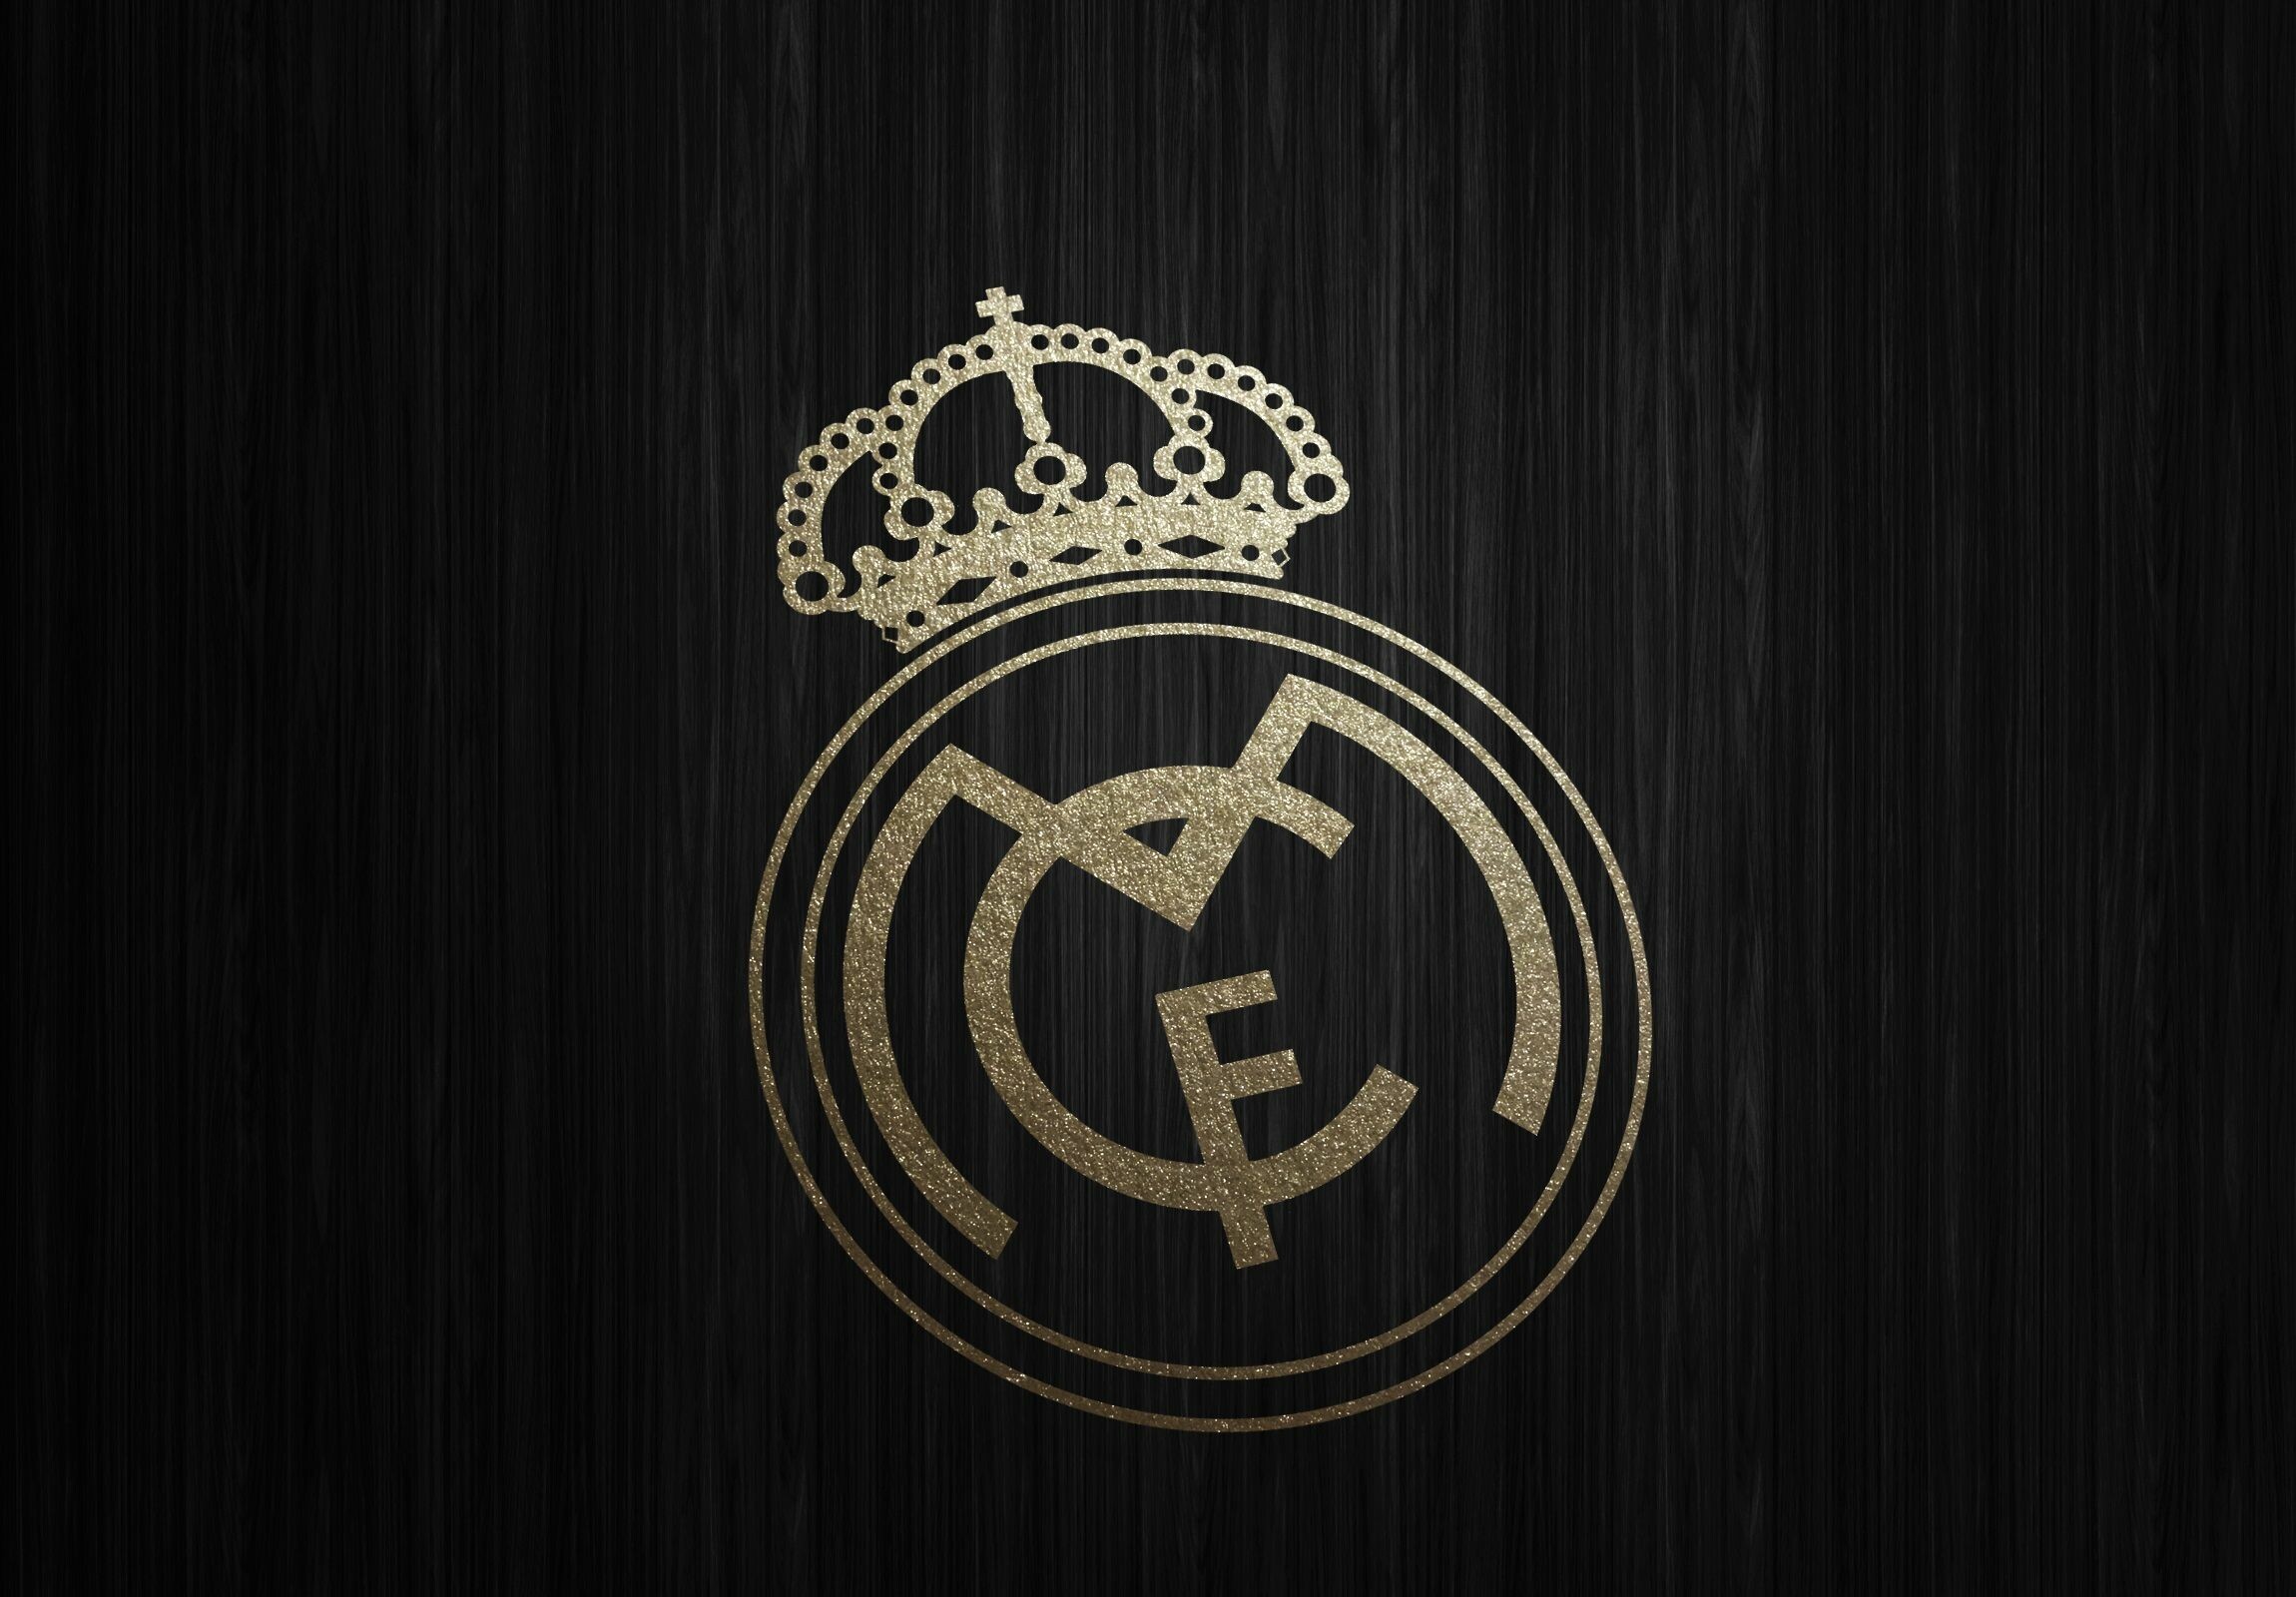 Real Madrid C.F., Iconic football logo, Best wallpaper collection, Real Madrid pride, 2300x1600 HD Desktop